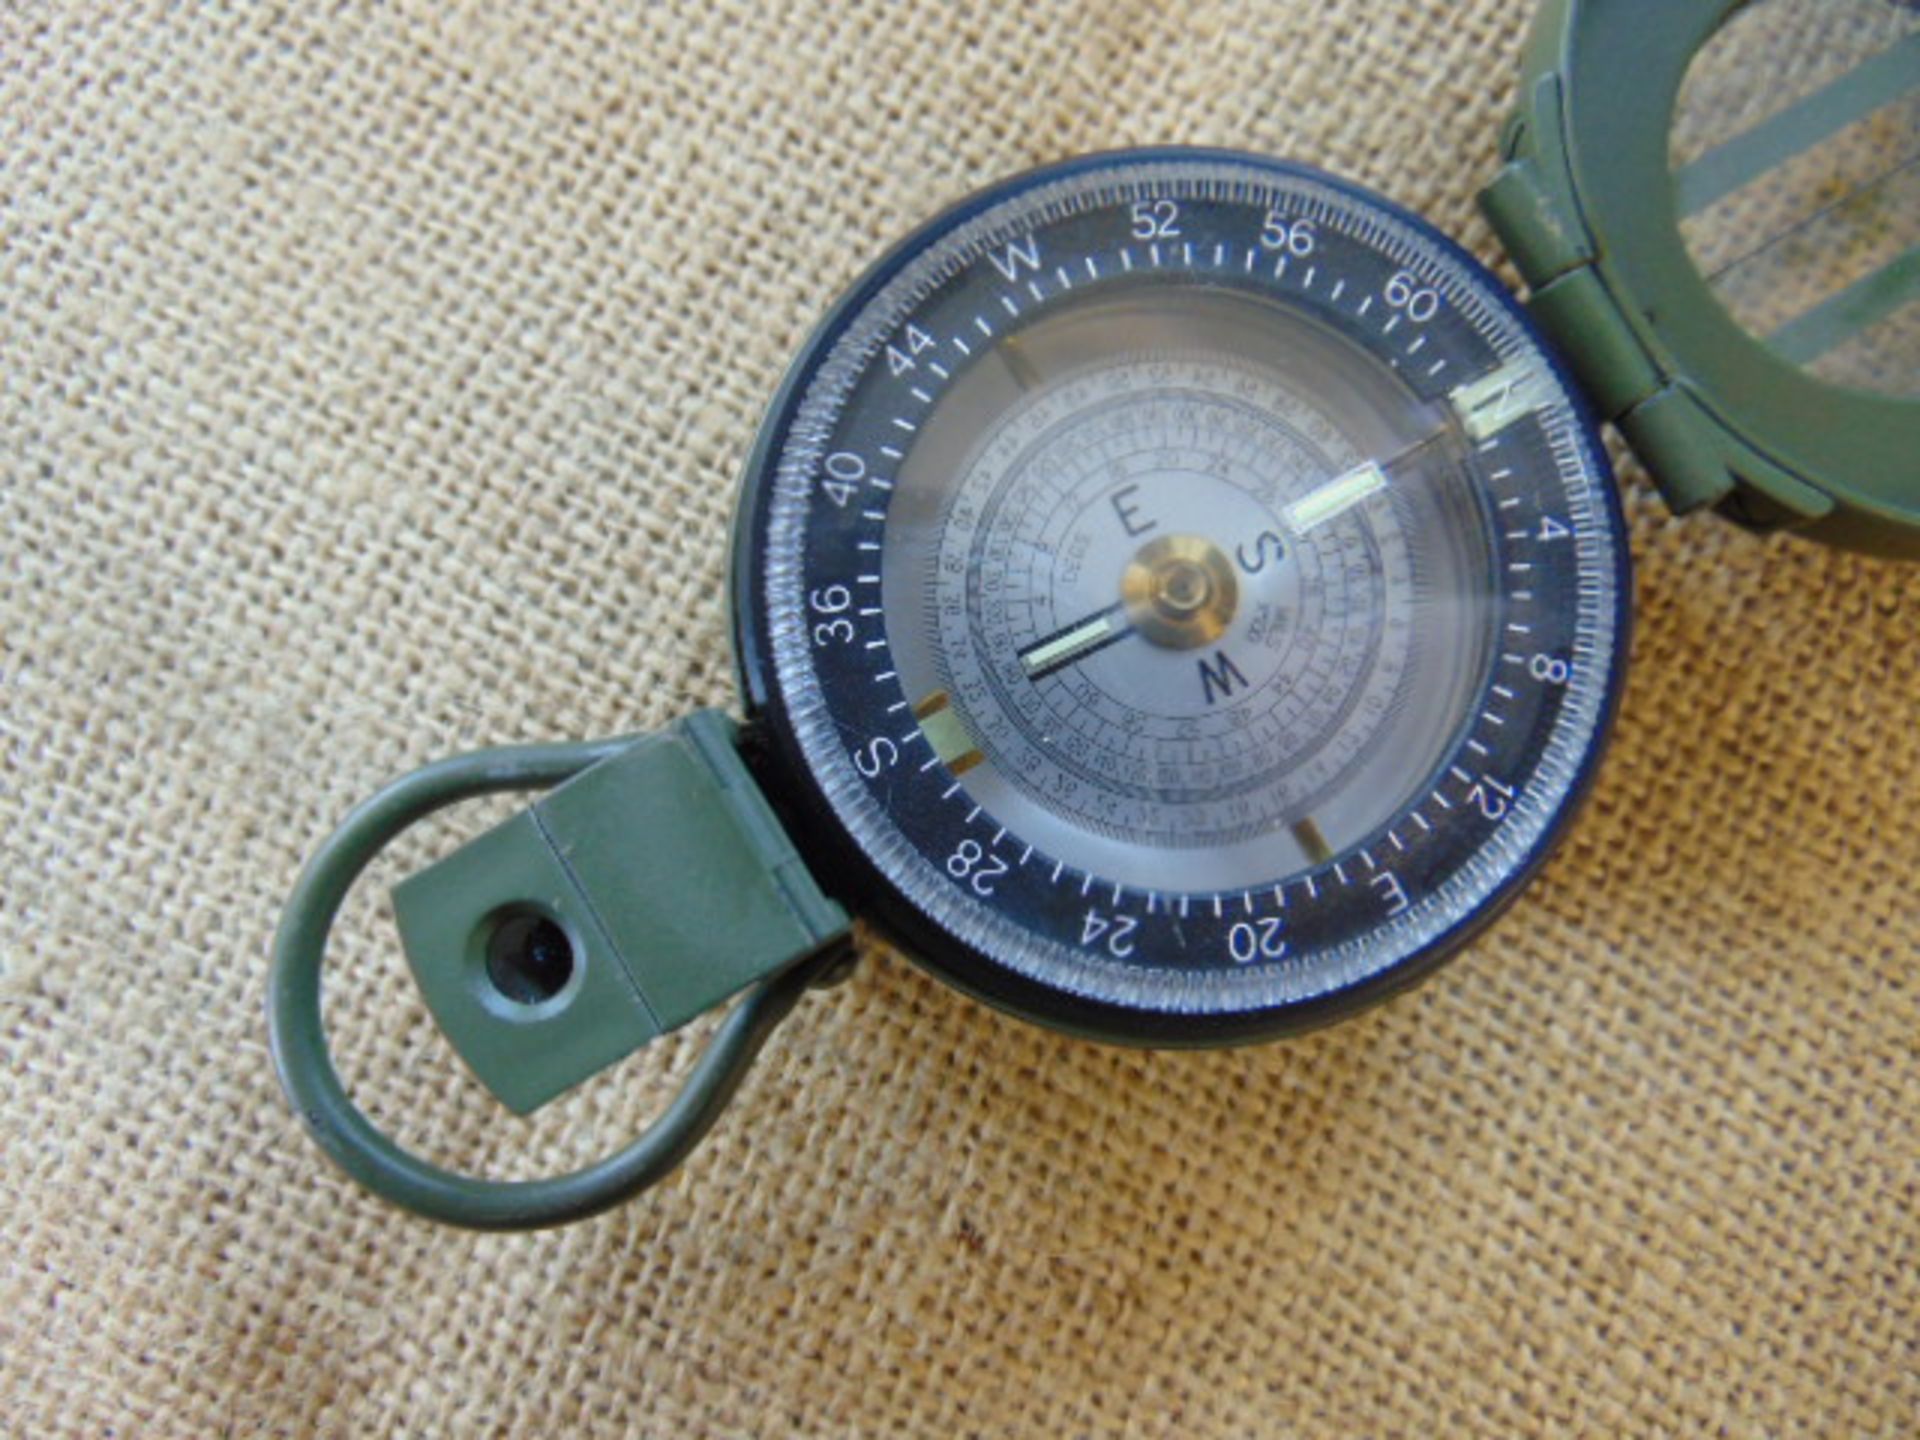 Unissued Genuine British Army Francis Barker M88 Prismatic Marching Compass - Image 2 of 5